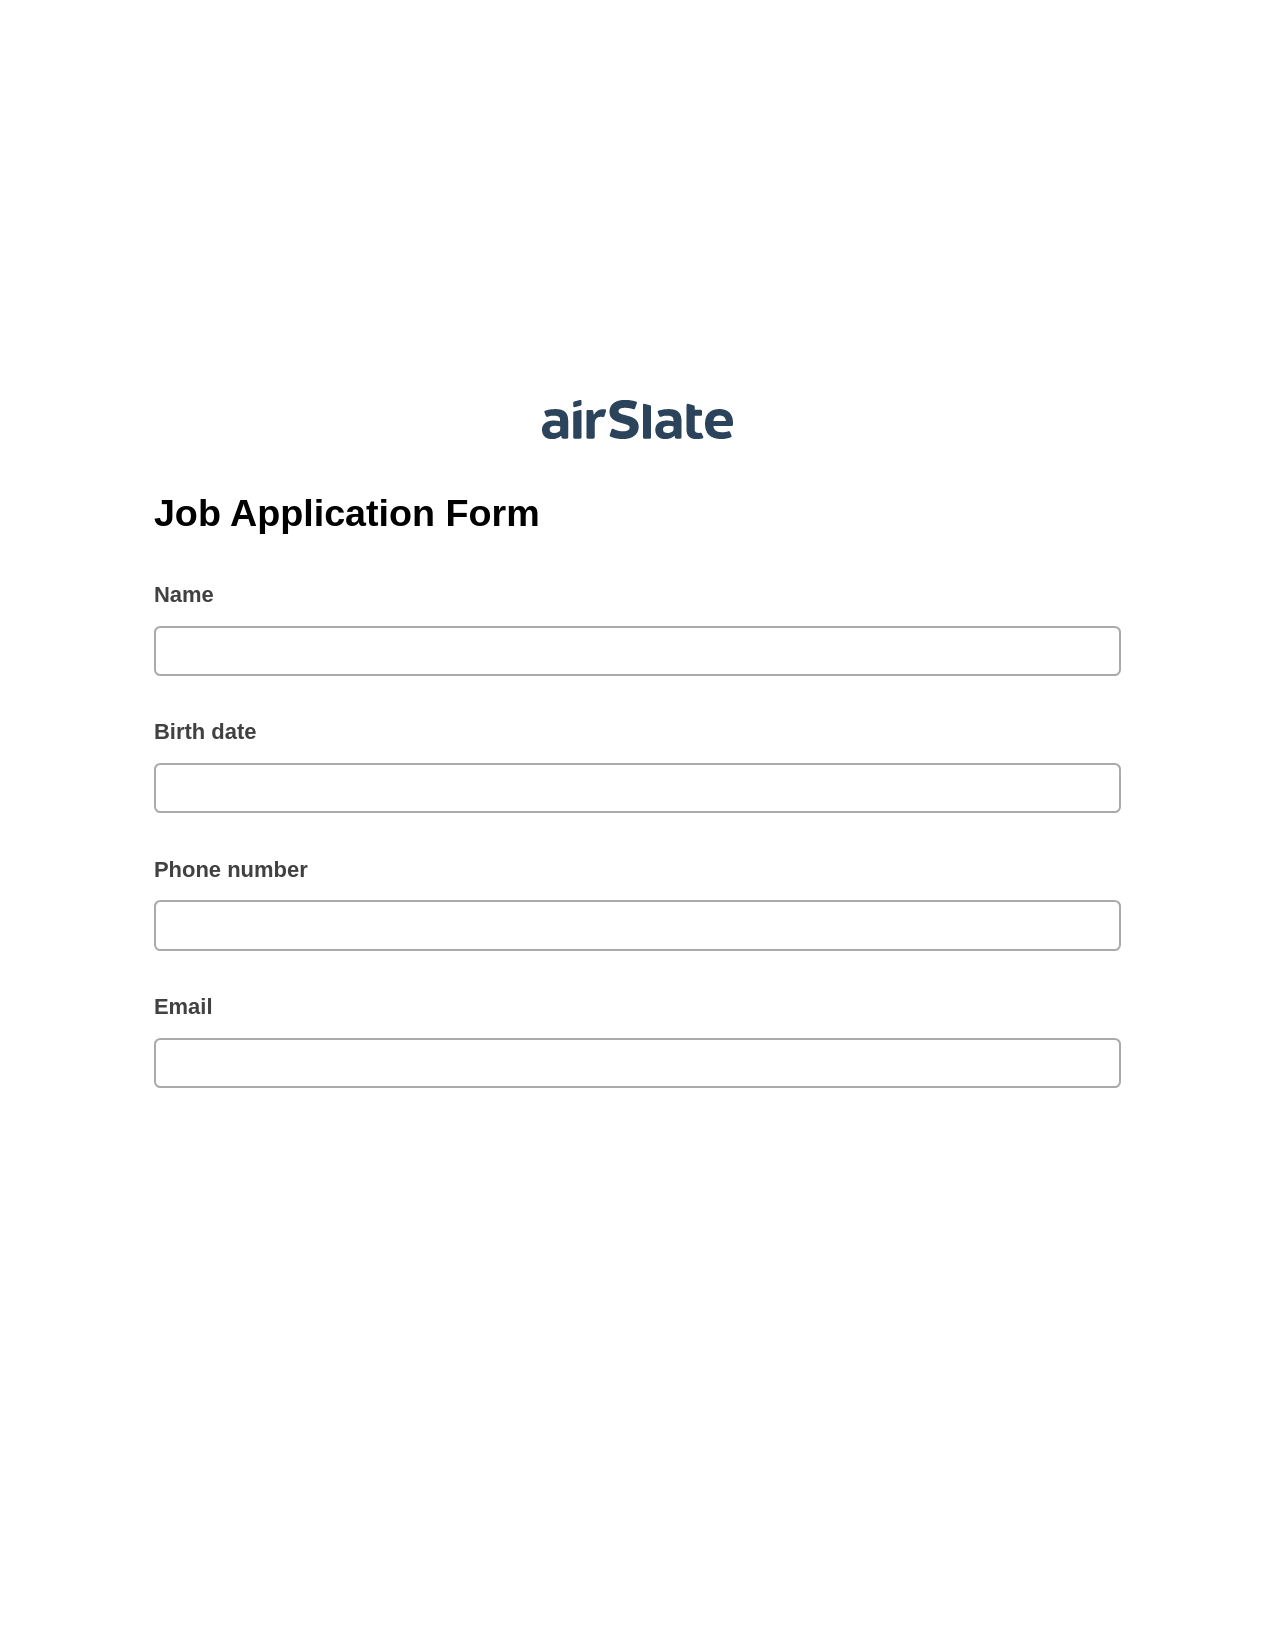 Multirole Job Application Form Pre-fill Dropdowns from Smartsheet Bot, Email Notification Bot, Export to Formstack Documents Bot